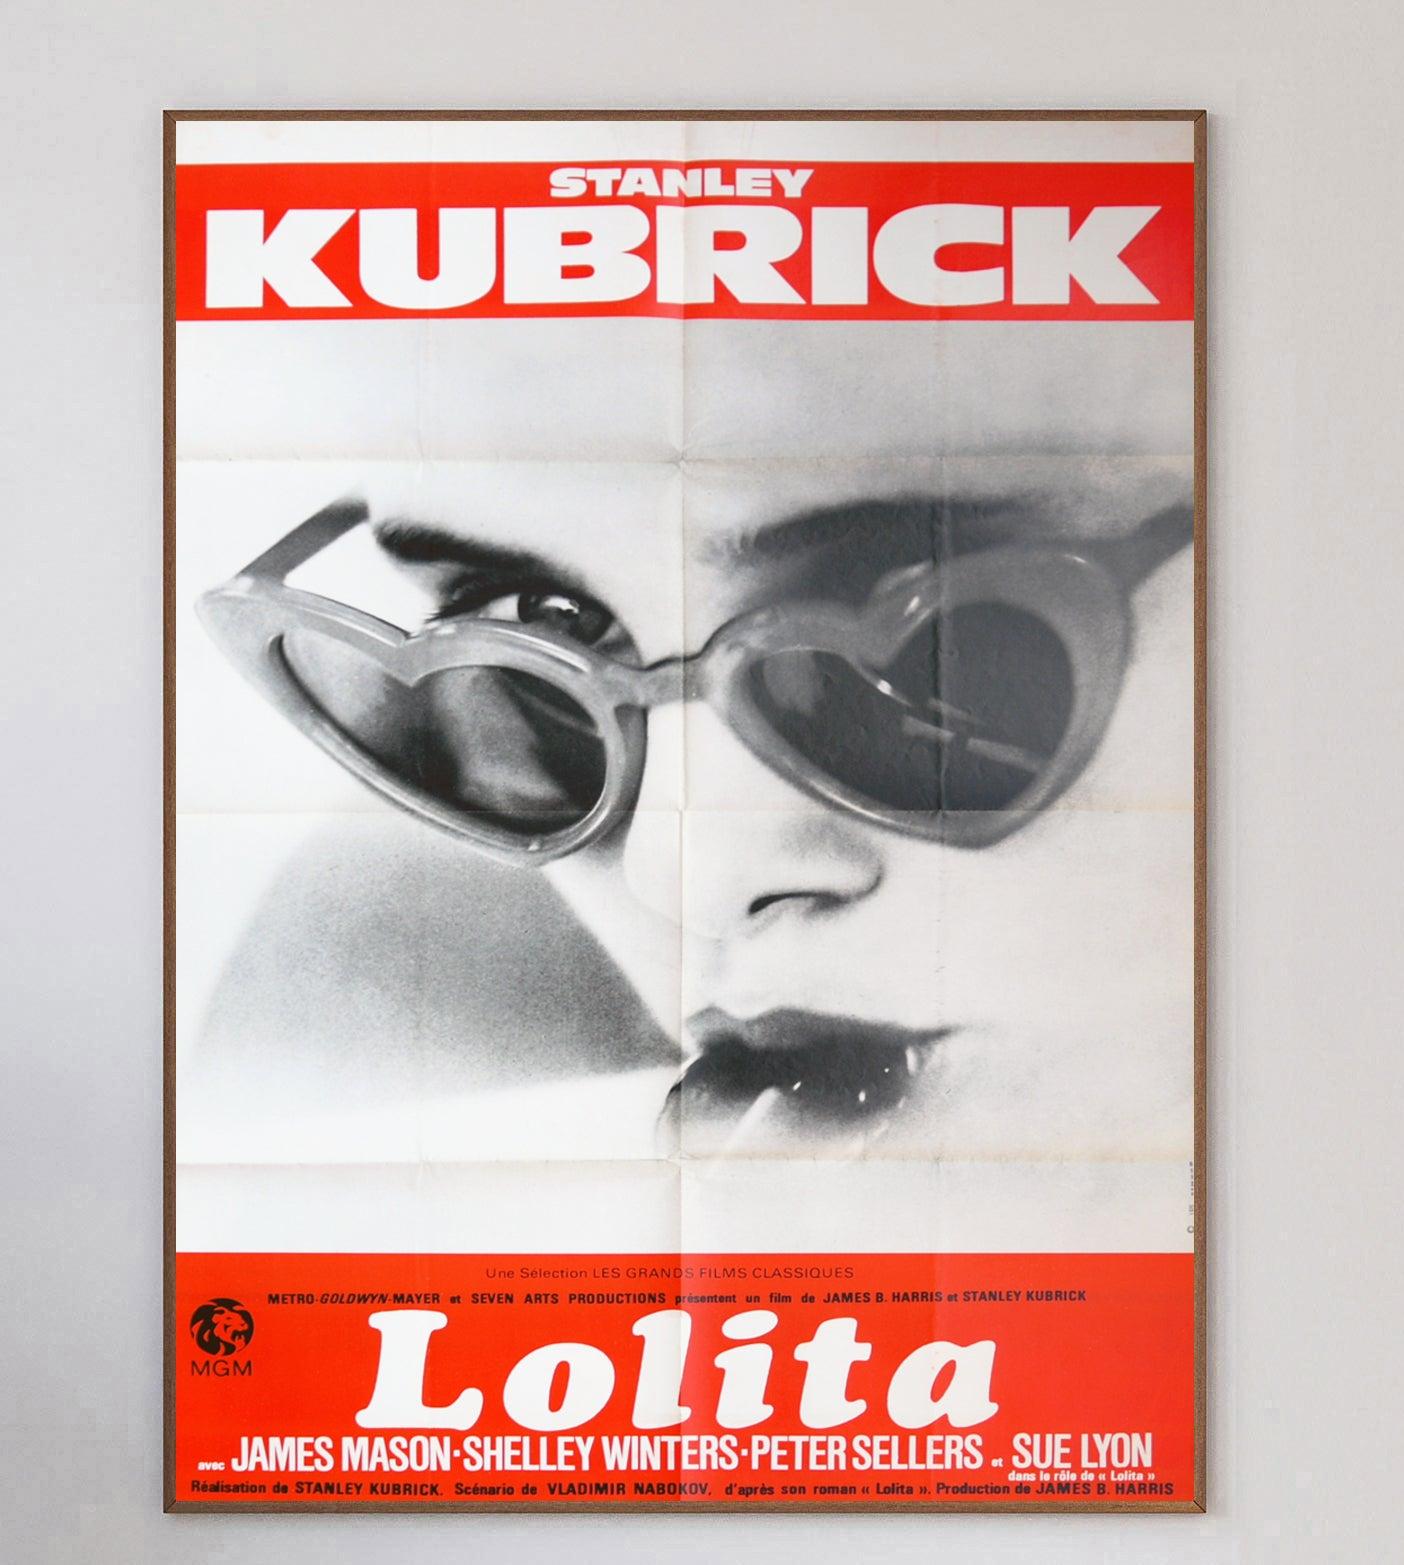 Based on Vladimir Nabokov's 1955 novel of the same name, Stanley Kubrick's Lolita was released in 1962. The film was highly controversial and heavily censored upon release, however is regarded as a strong commercial and critical success.

This